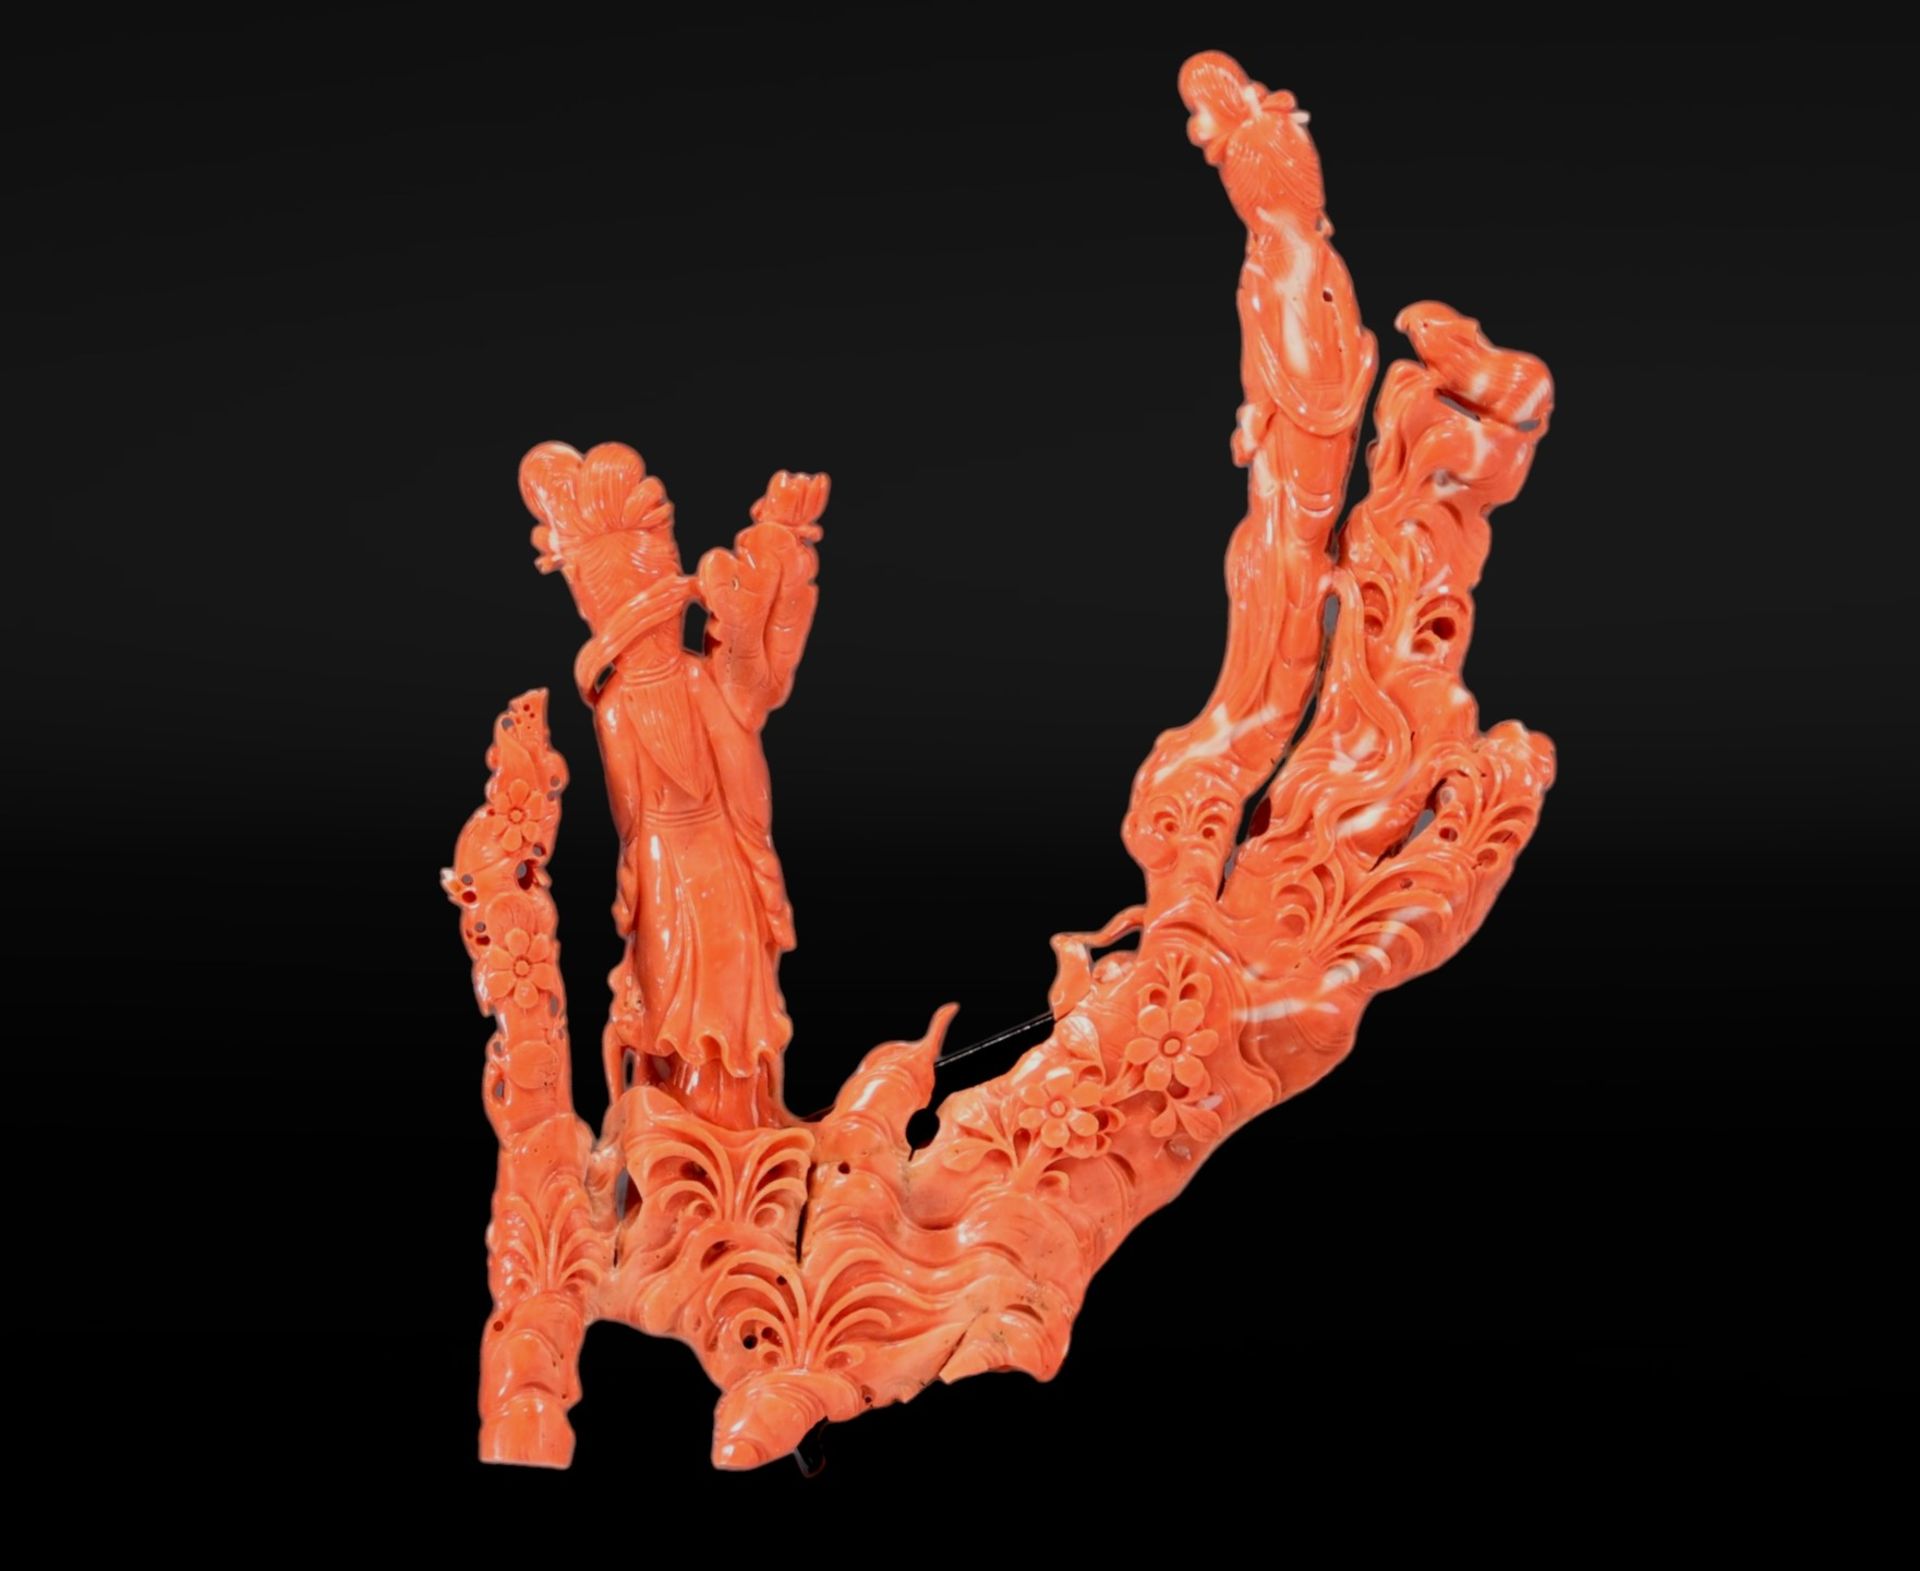 Large sculpture in red coral "young women rabbits" - Image 2 of 3